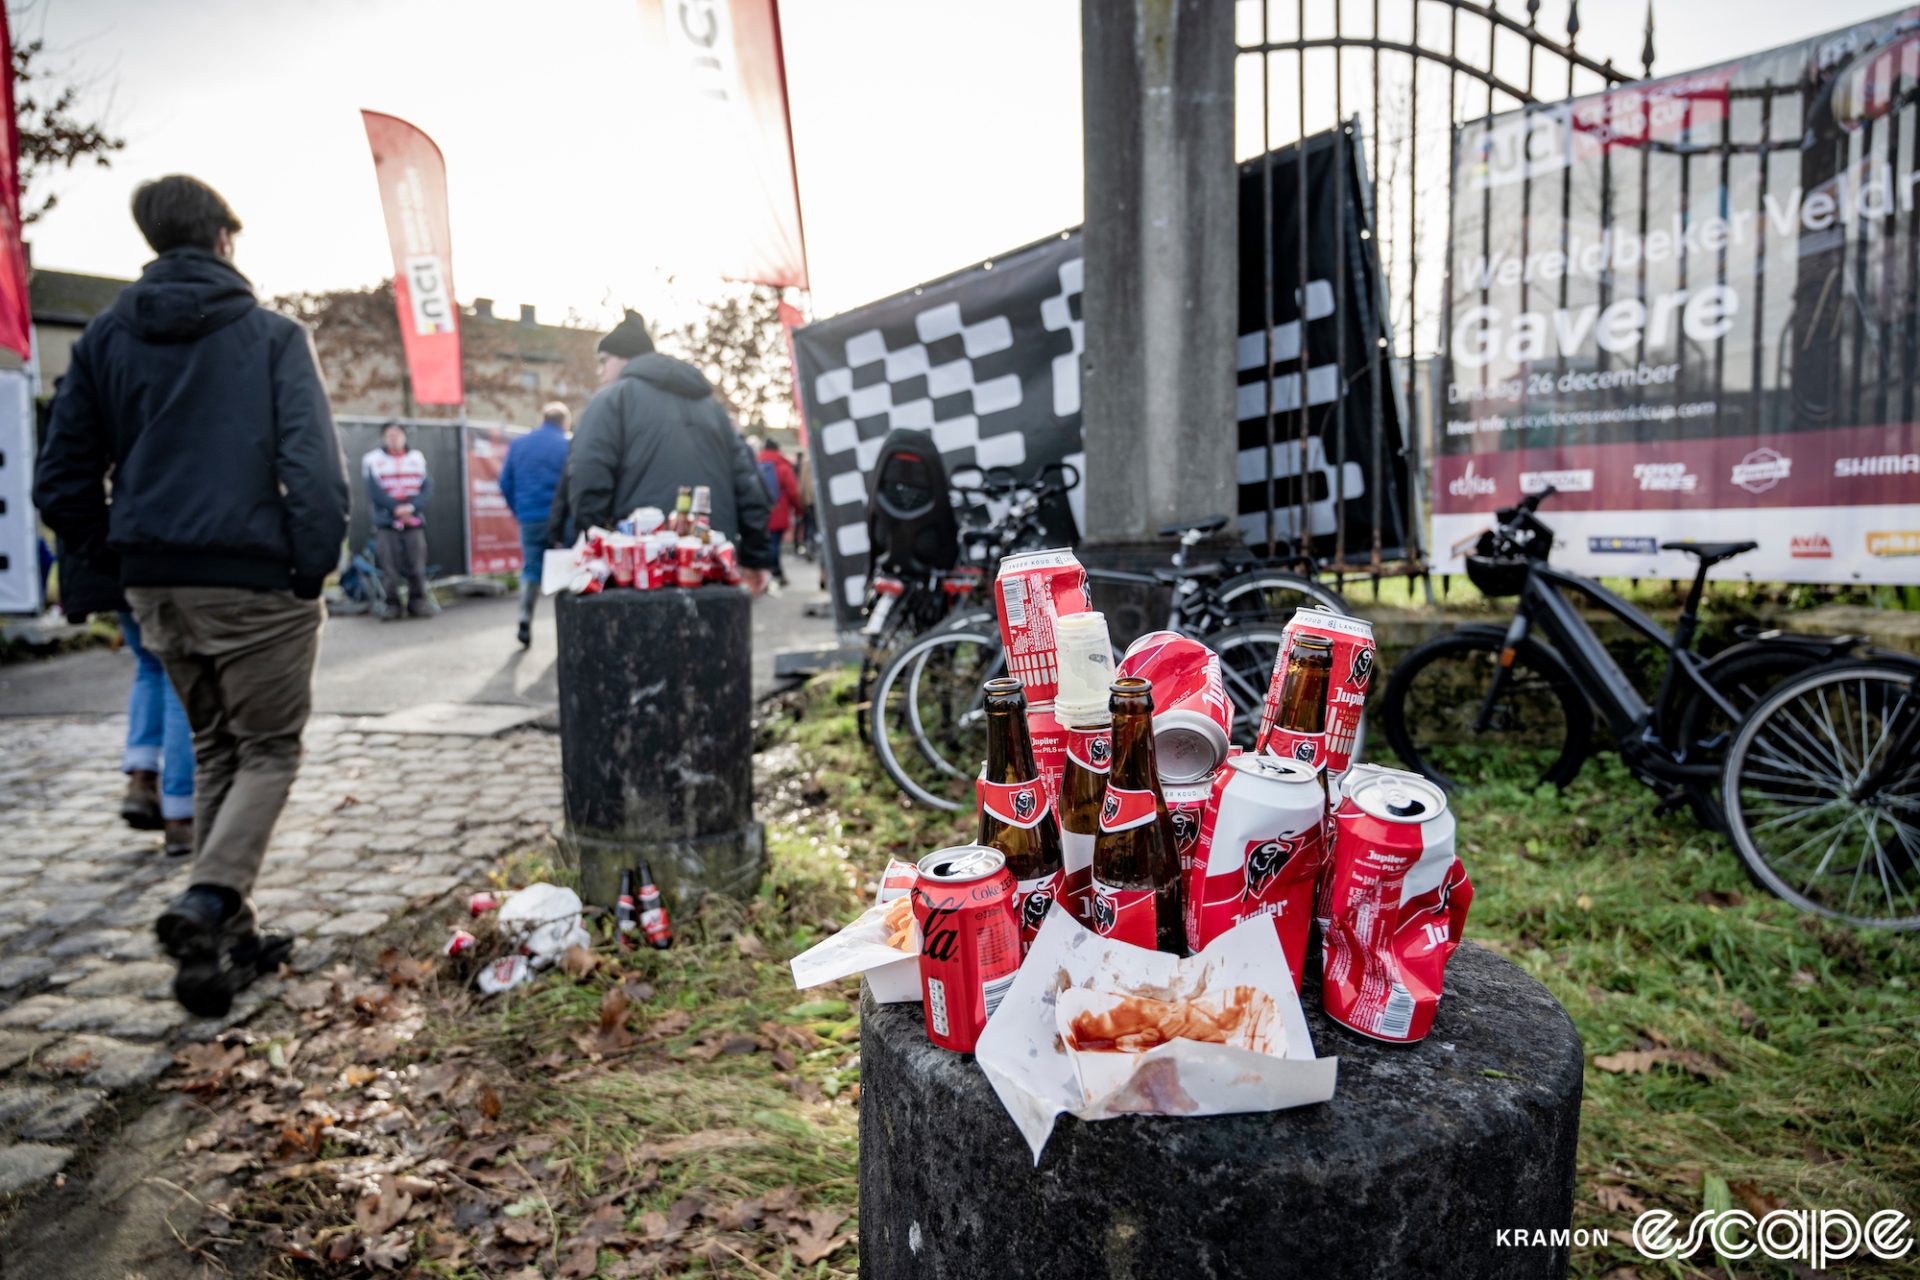 Stacks of beer cans sit atop stone bollards at the entrance to the Gavere World Cup venue.